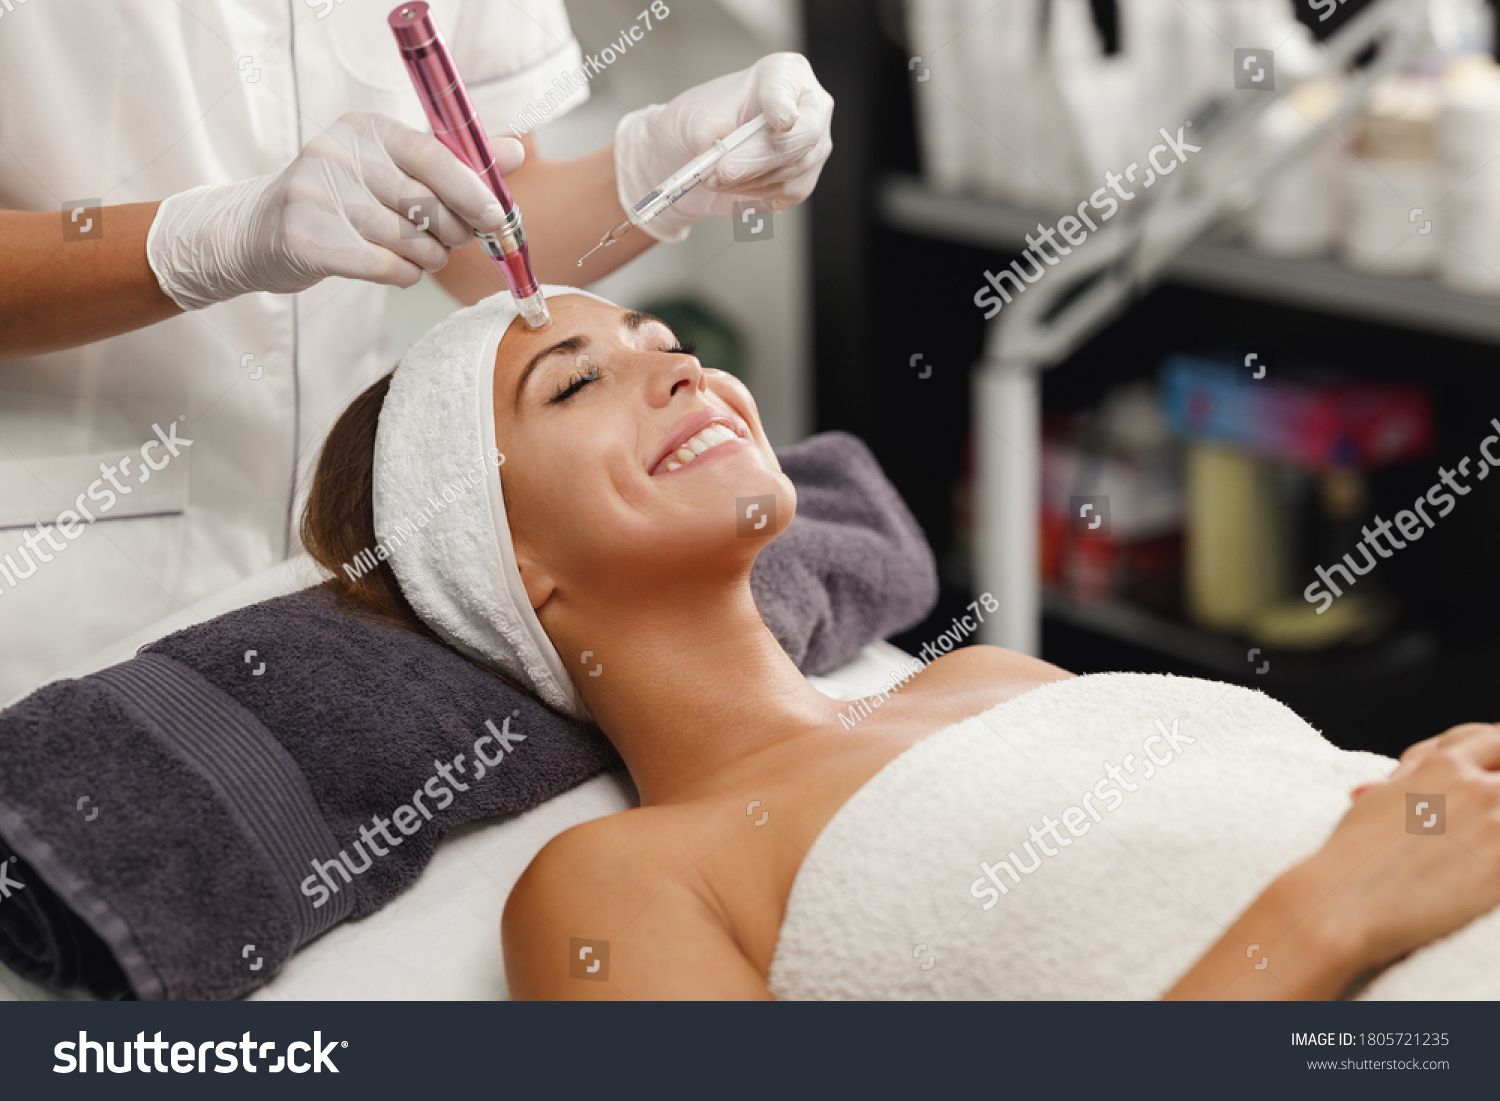 Shot of a beautiful young woman on a facial dermapen micro-needling treatment at the beauty salon. #1805721235